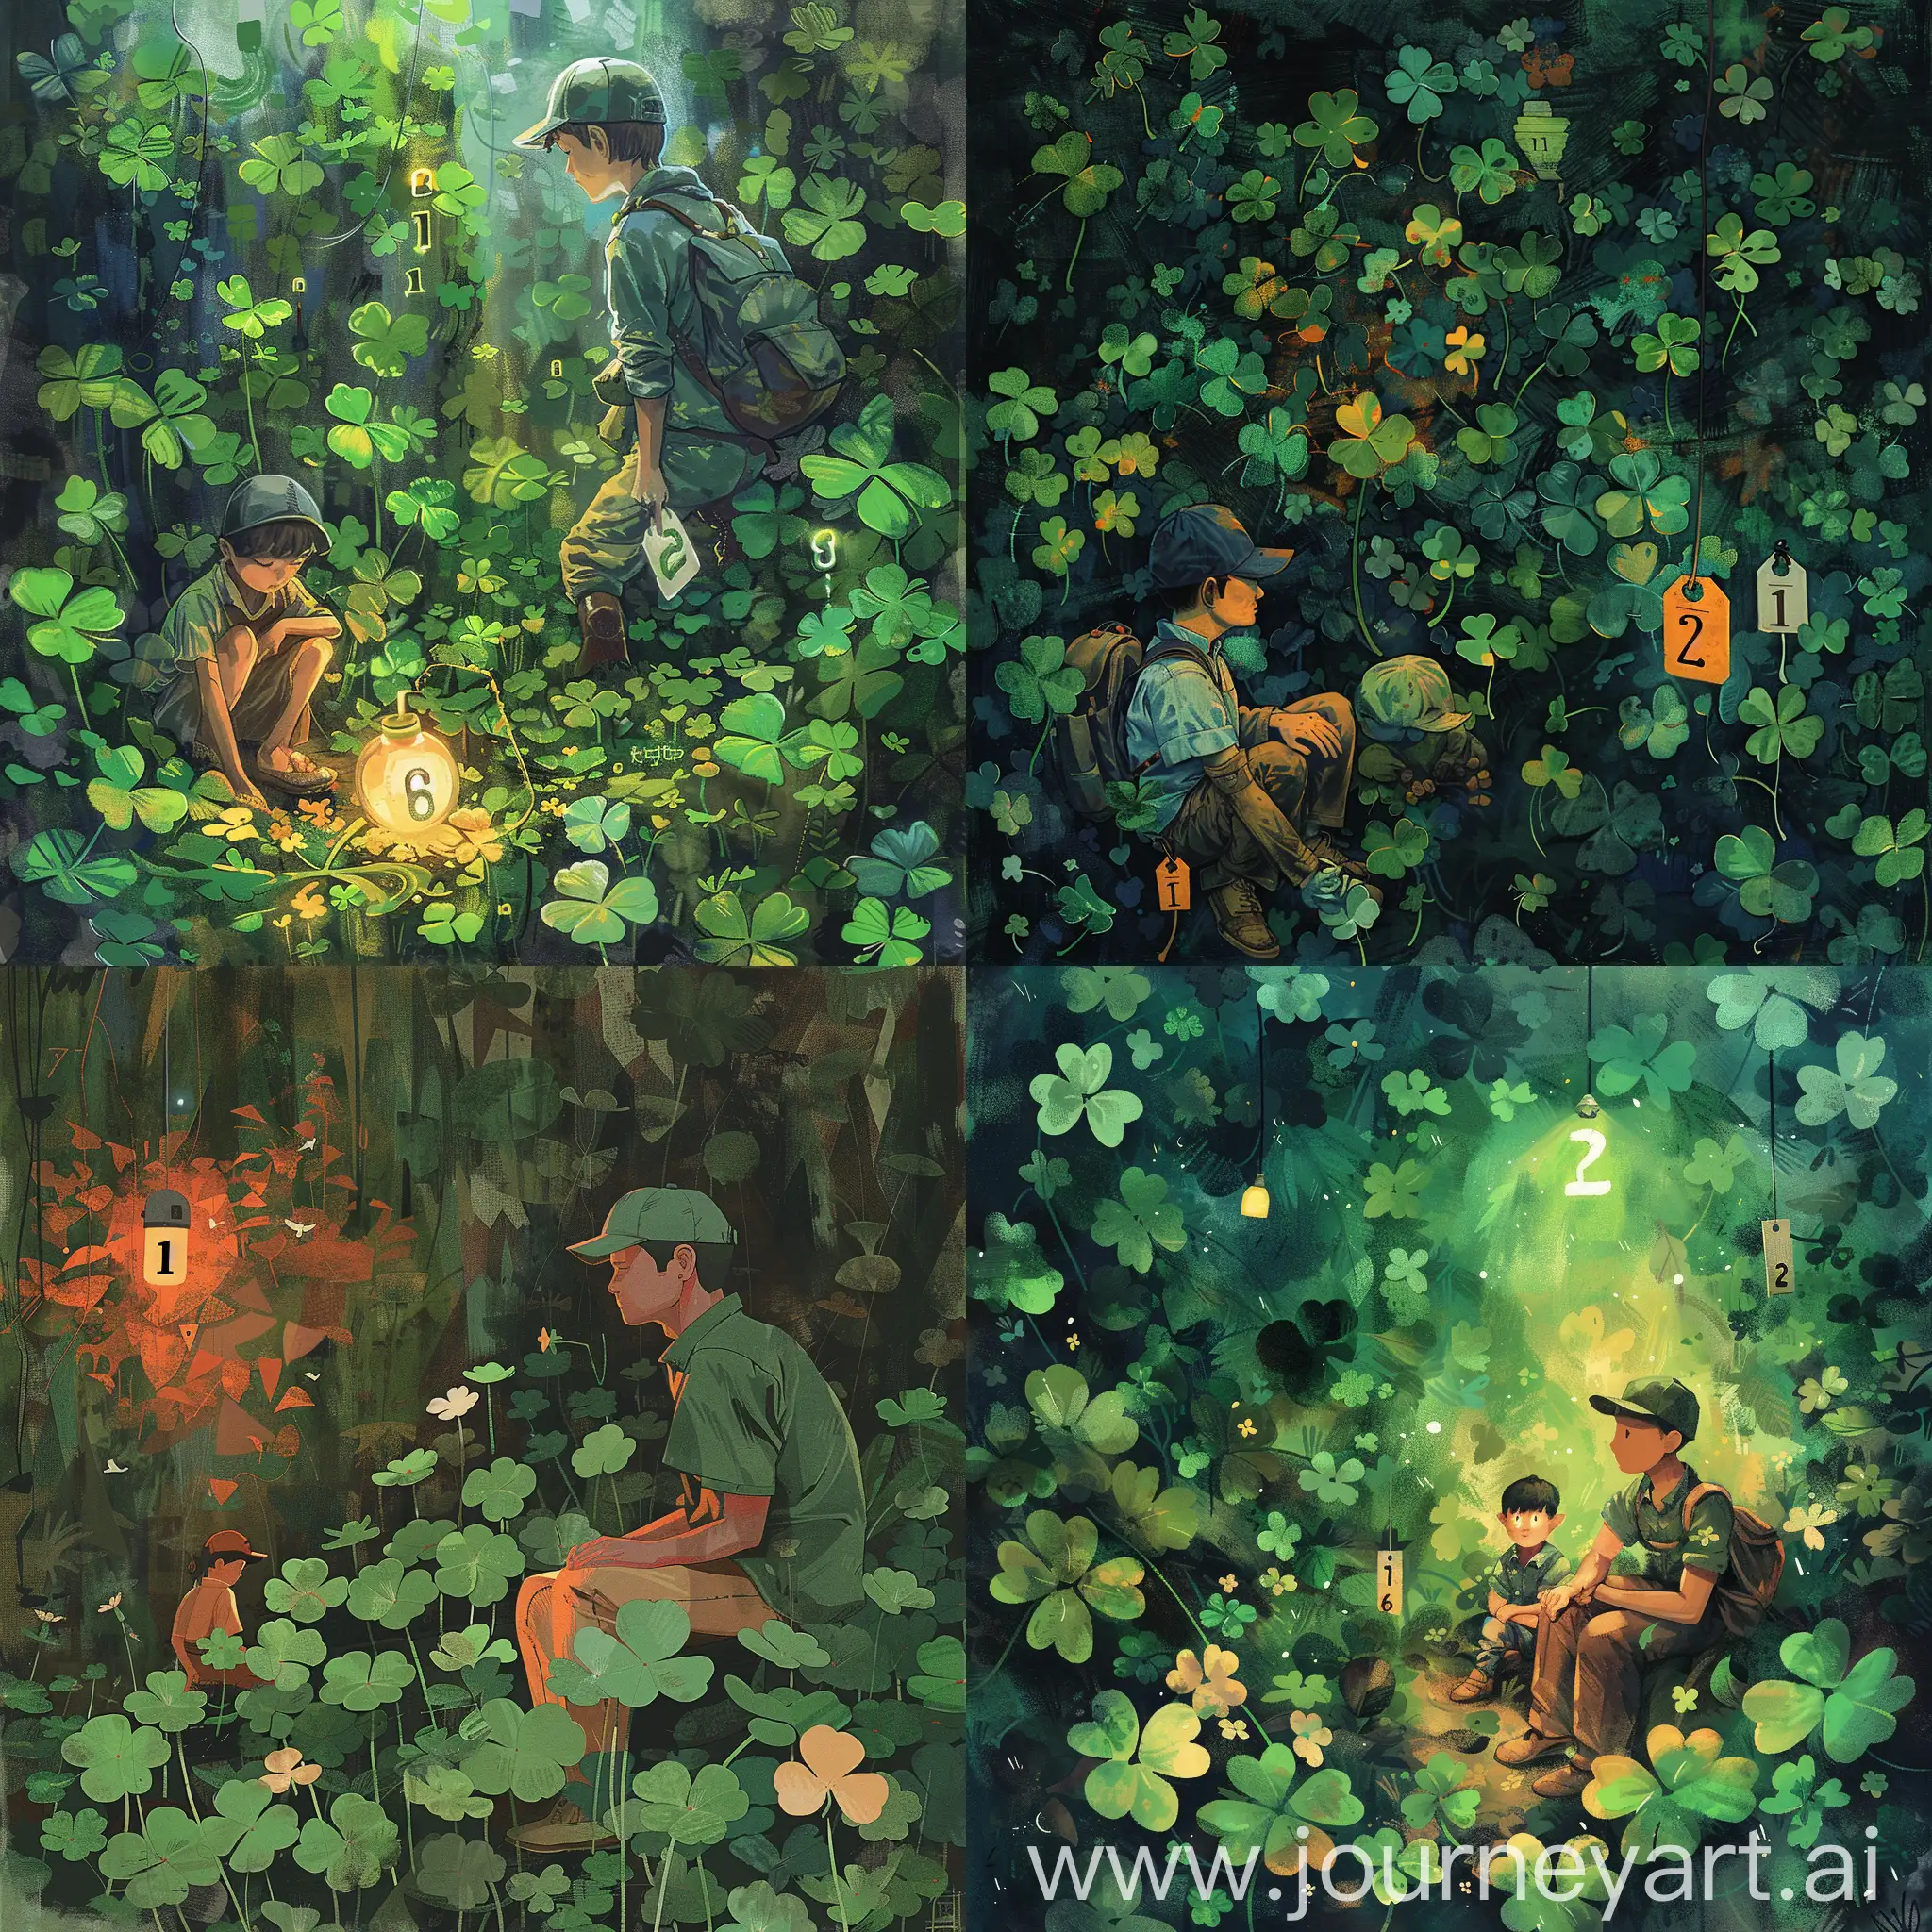 Fantastic exploration world , japan man 1 exploer on cap, boy 2, hunting, forest, clover flowers jungle fields, clover flowers kingdom, ((clover flowers lamp light on numbers tag)), looking sitting on the side round clovers, humor, and sense of adventure of the characters on a quest in a vibrant and colorful fantasy setting. illustration, acrylic, abstract shapes, grained texture, procreate, watercolor, illustrator, hand drawn, grained, textured